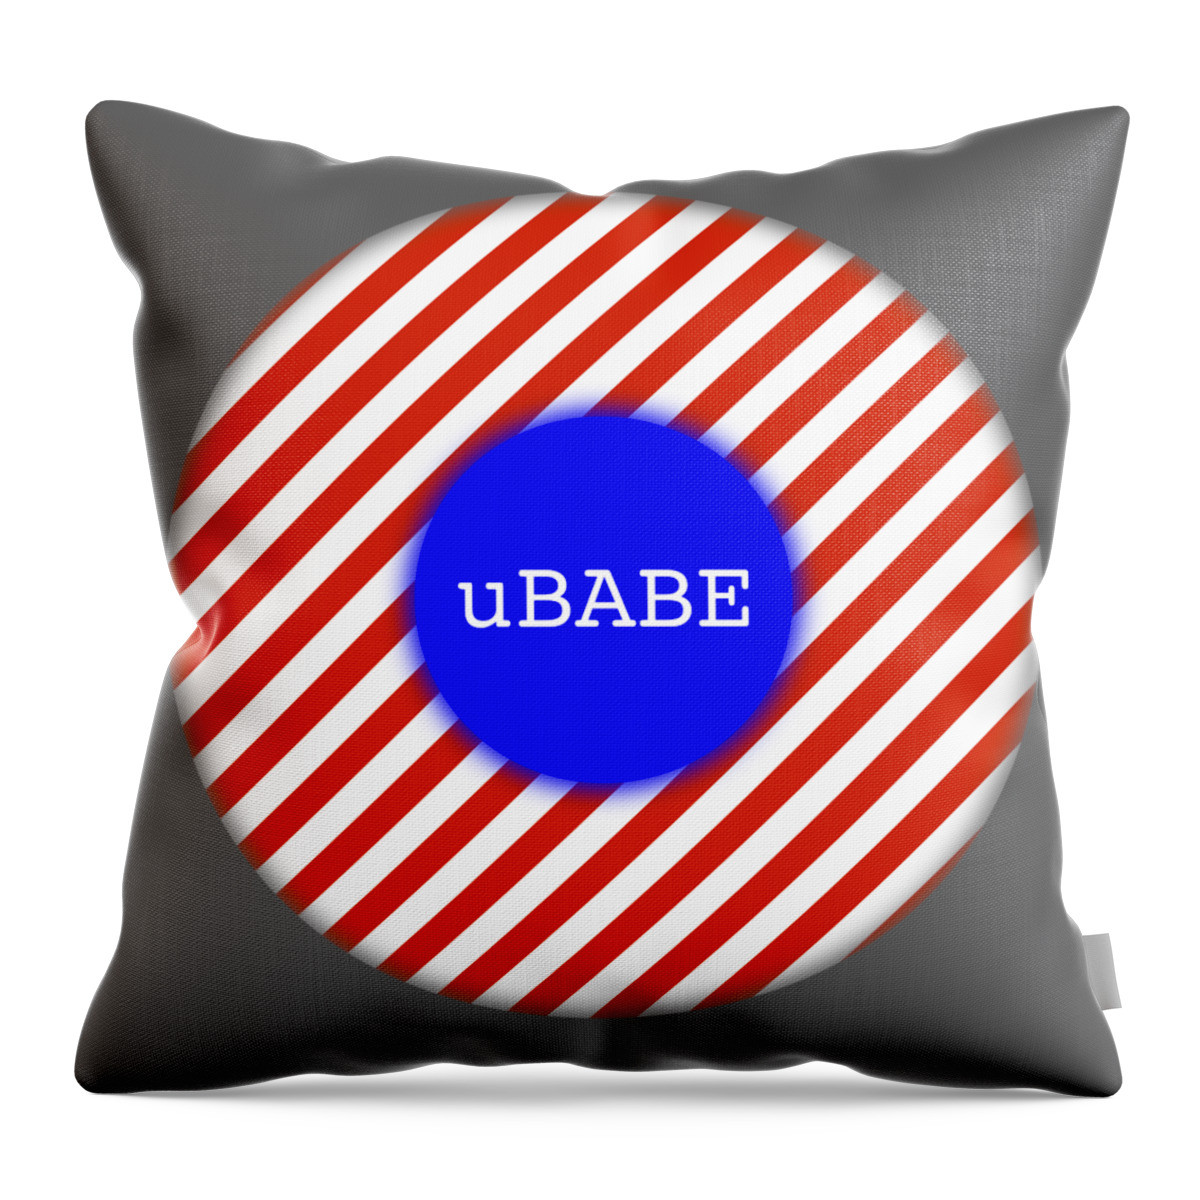 Ubabe Mint Throw Pillow featuring the digital art Candy by Ubabe Style